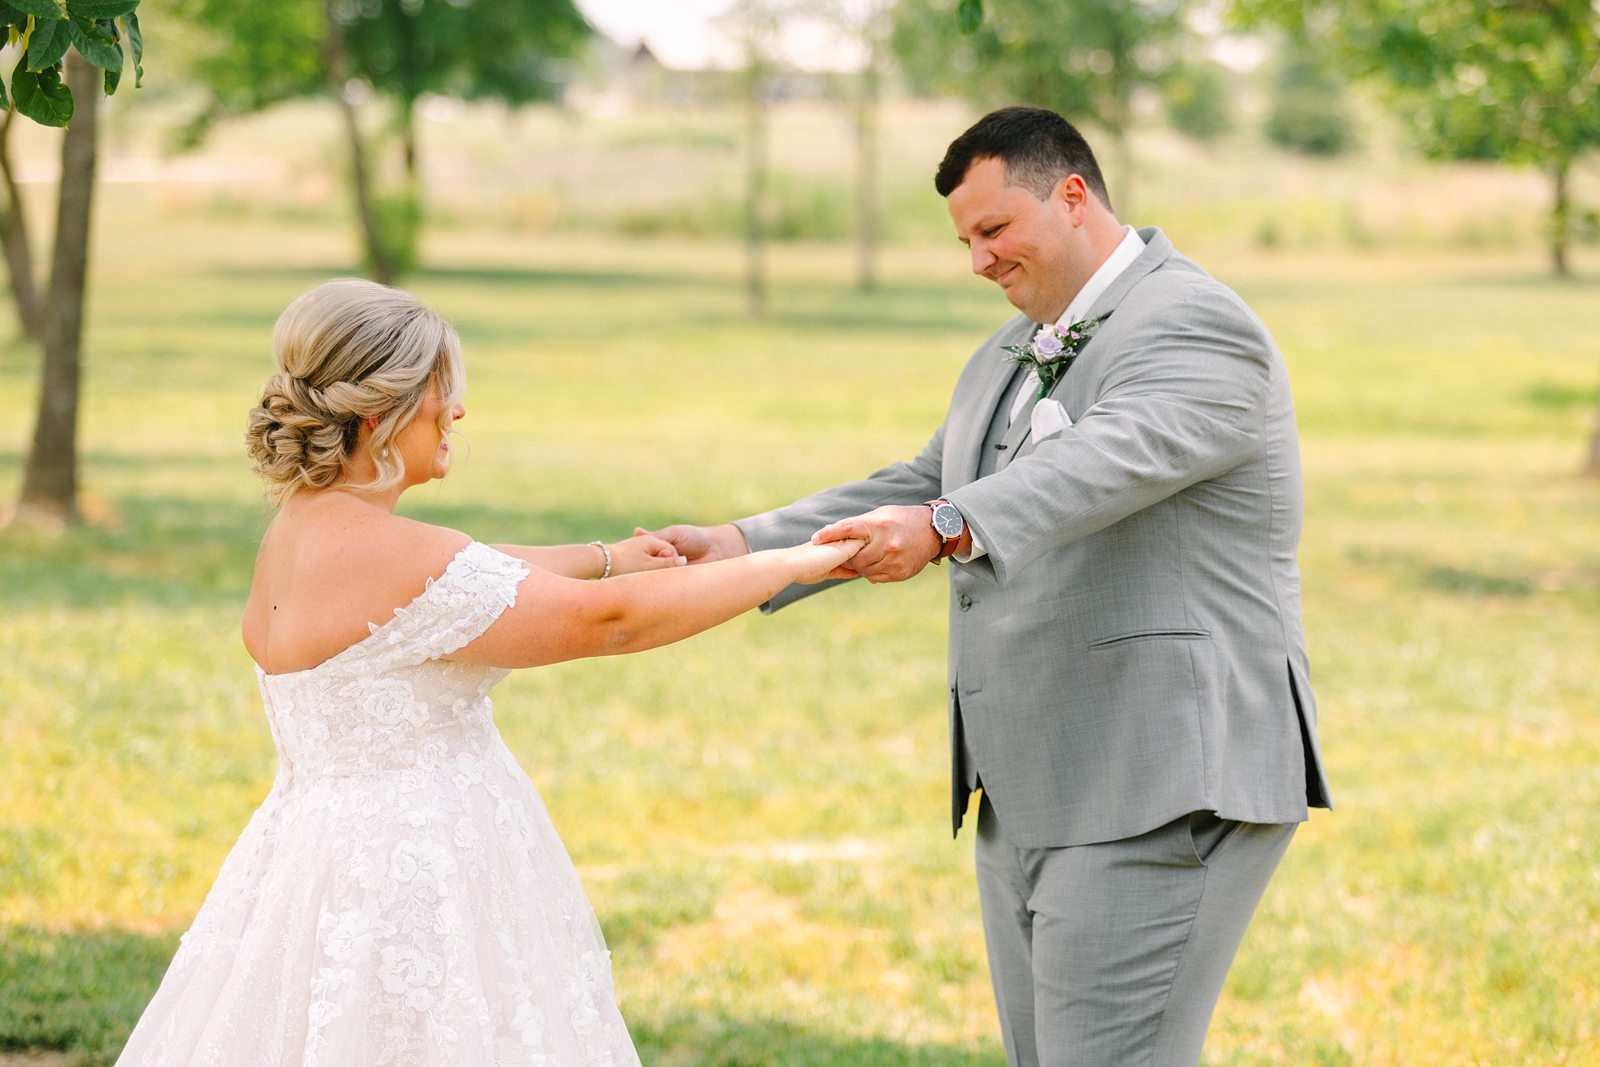 A Sunny Summer Wedding at Friedman Park in Newburgh Indiana | Paige and Dylan | Bret and Brandie Photography063.jpg